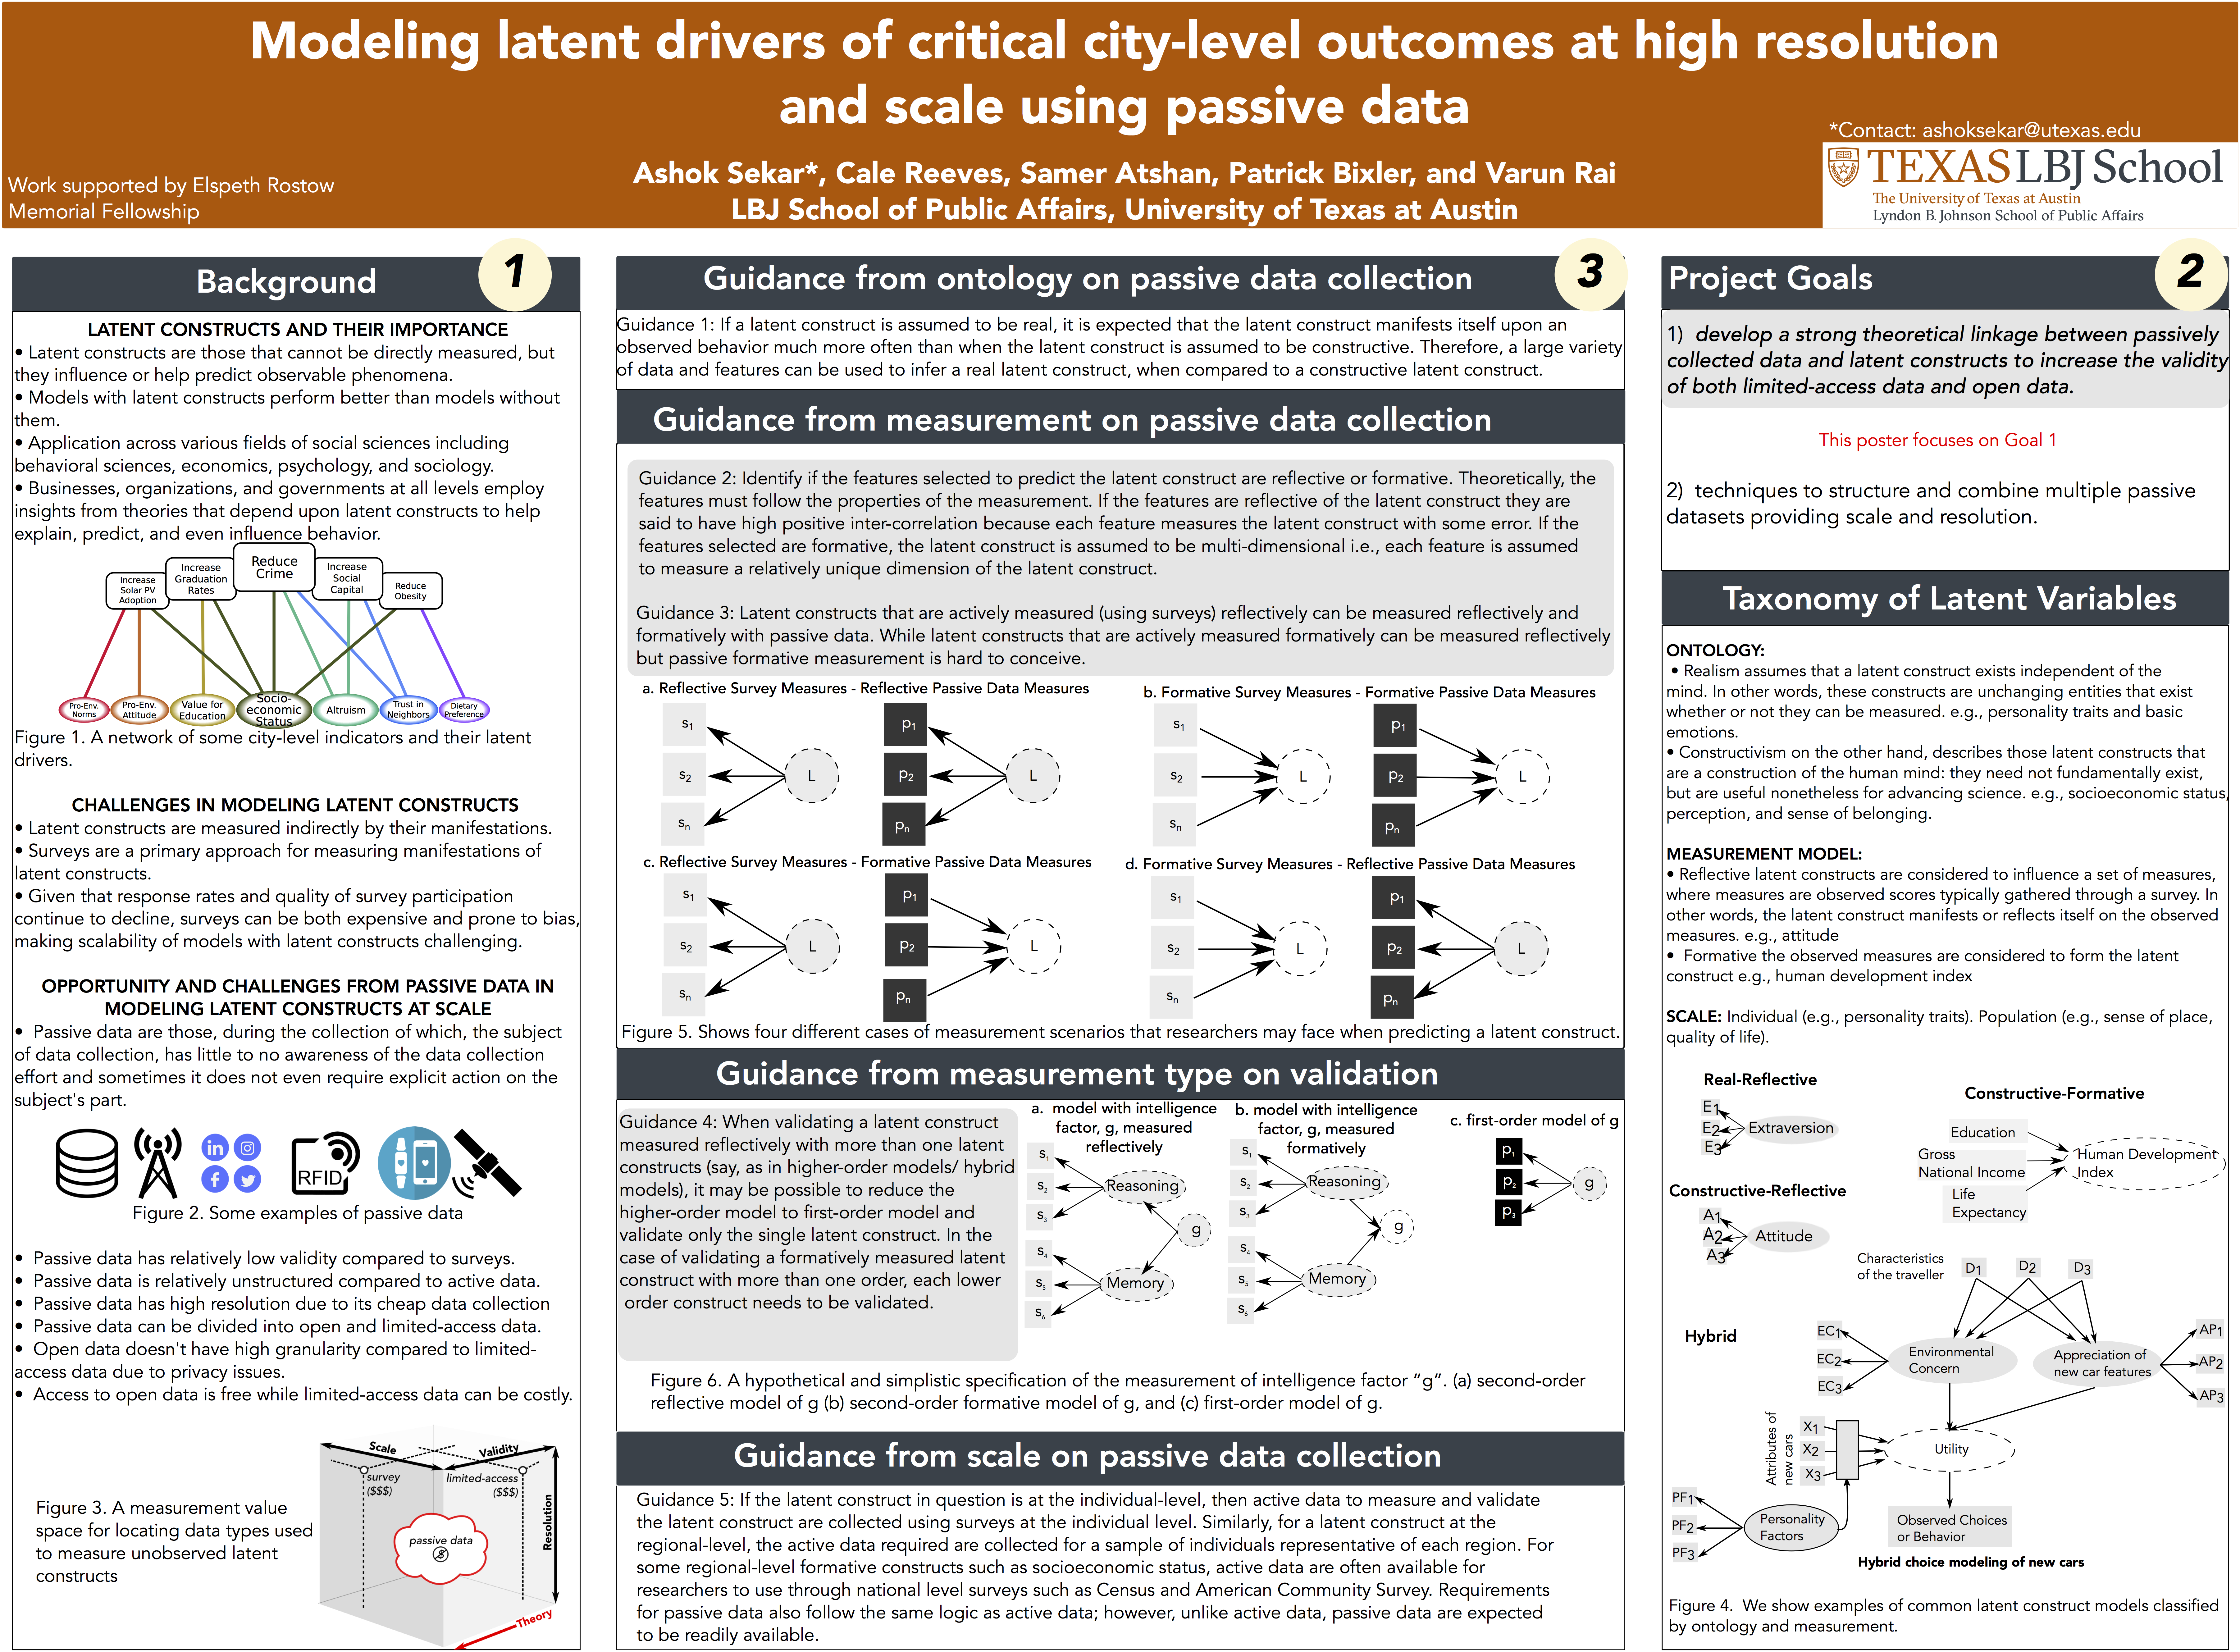 Innovation Bound 2019 research poster: Infrastructure for Modeling Latent Drivers of Critical City-level Outcomes at High Resolution and Scale Using Passive Data